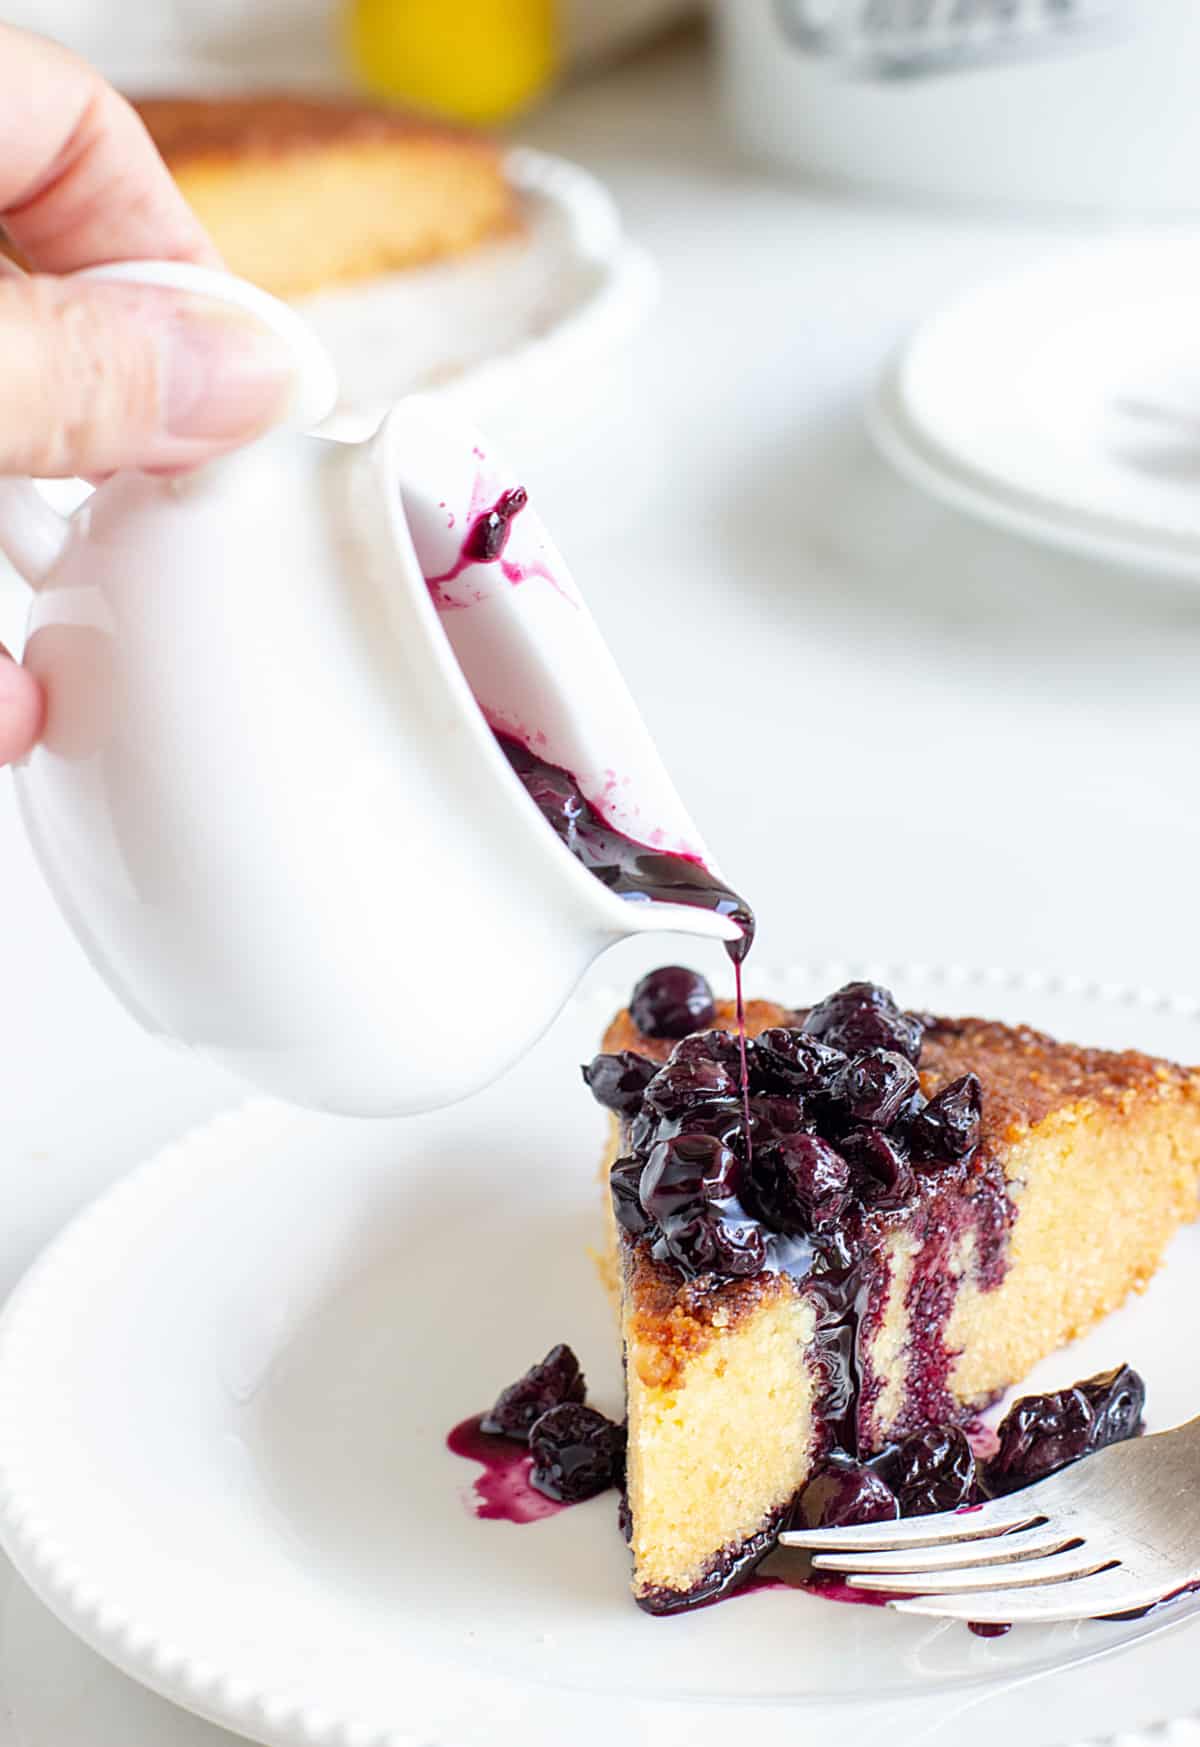 Pouring blueberry sauce on slice of yellow cake from white saucer, white plate.